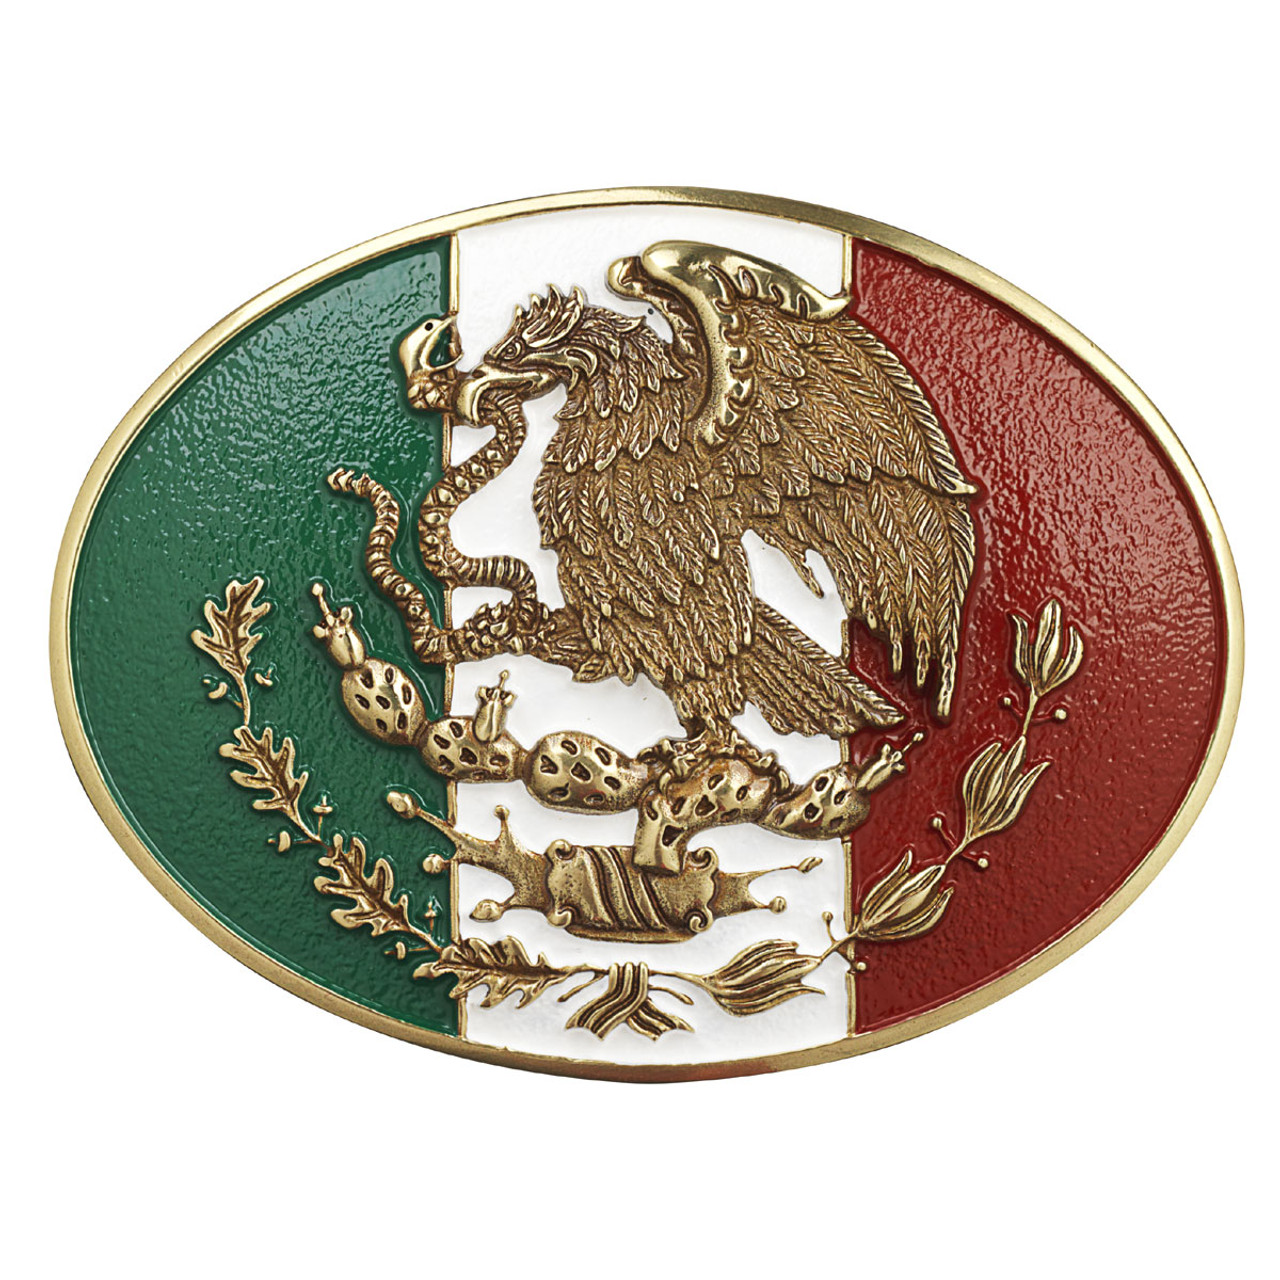 Ariat Gold Mexican Flag Belt Buckle - Jackson's Western